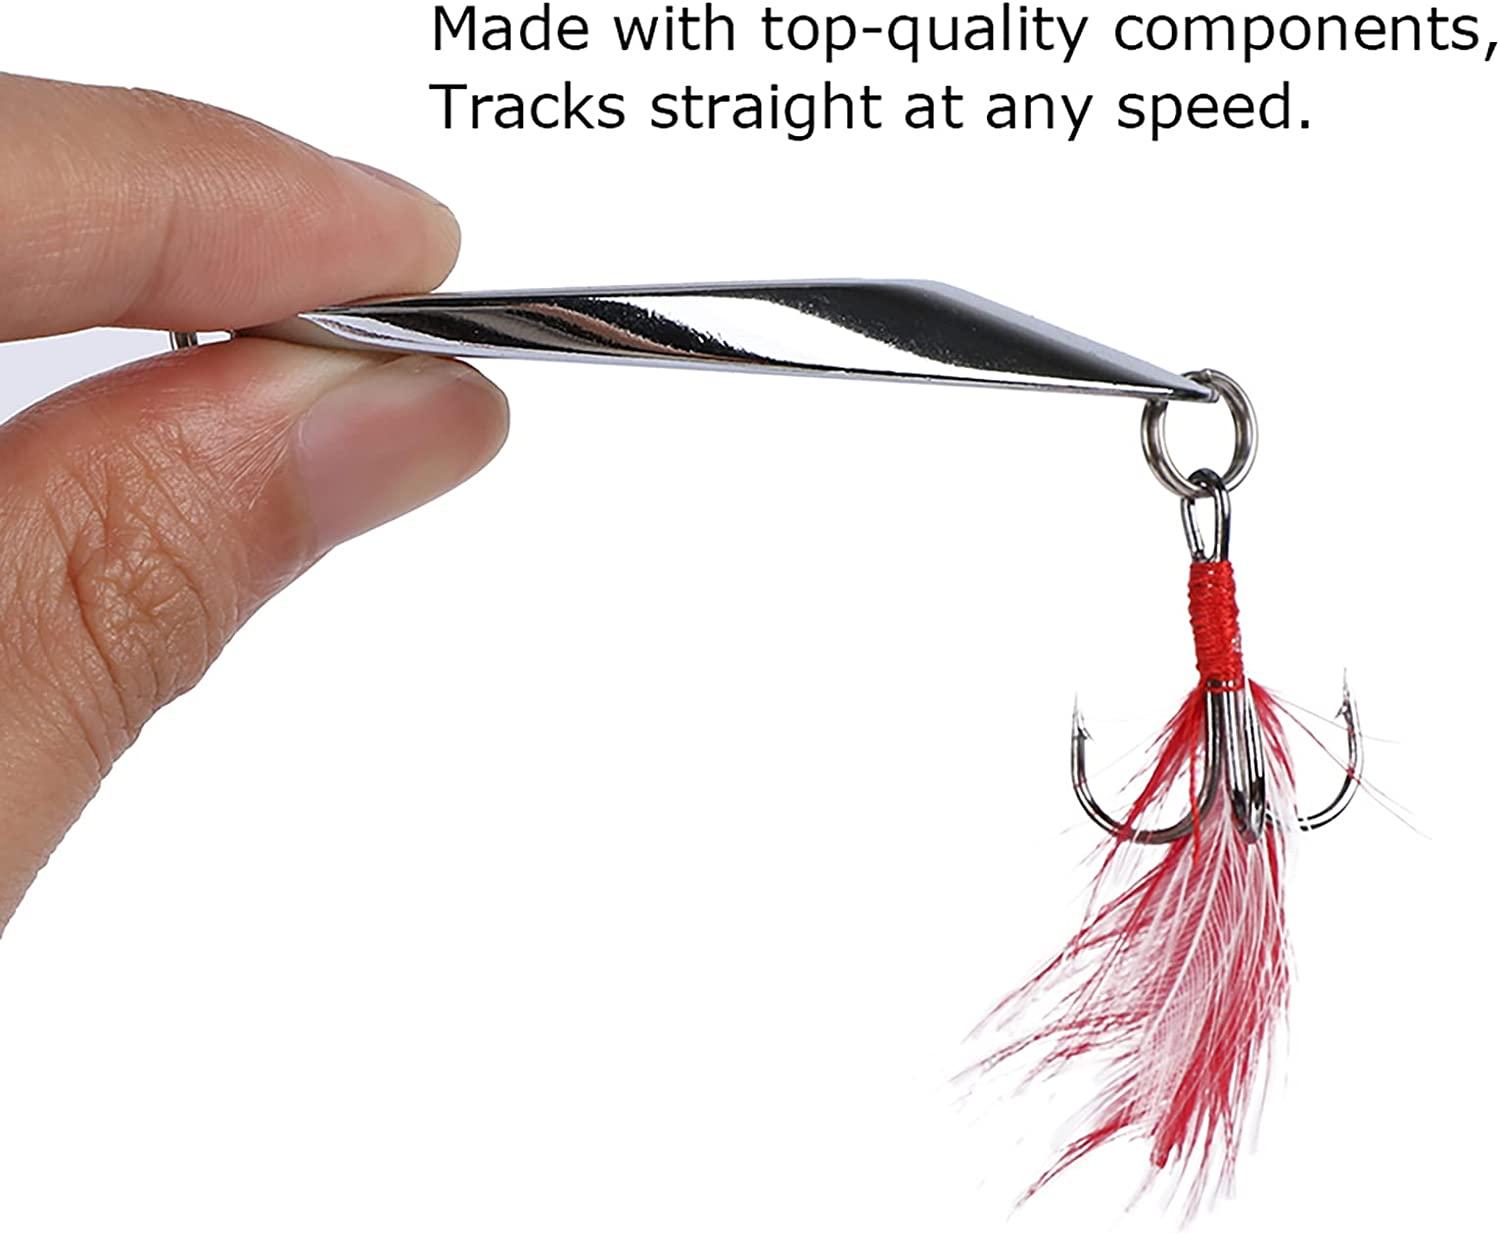 Goture Fishing Lures Fishing Spoons,Hard Lures Saltwater Spoon Lures  Casting Spoon/Ice Fishing Jigs for Trout Bass Pike Walleye Crappie Bluegill  1/10oz 1/8oz 1/7oz 1/6oz 1/5oz Bucktail spoon lures-10pcs 1.85 / 0.35 oz.